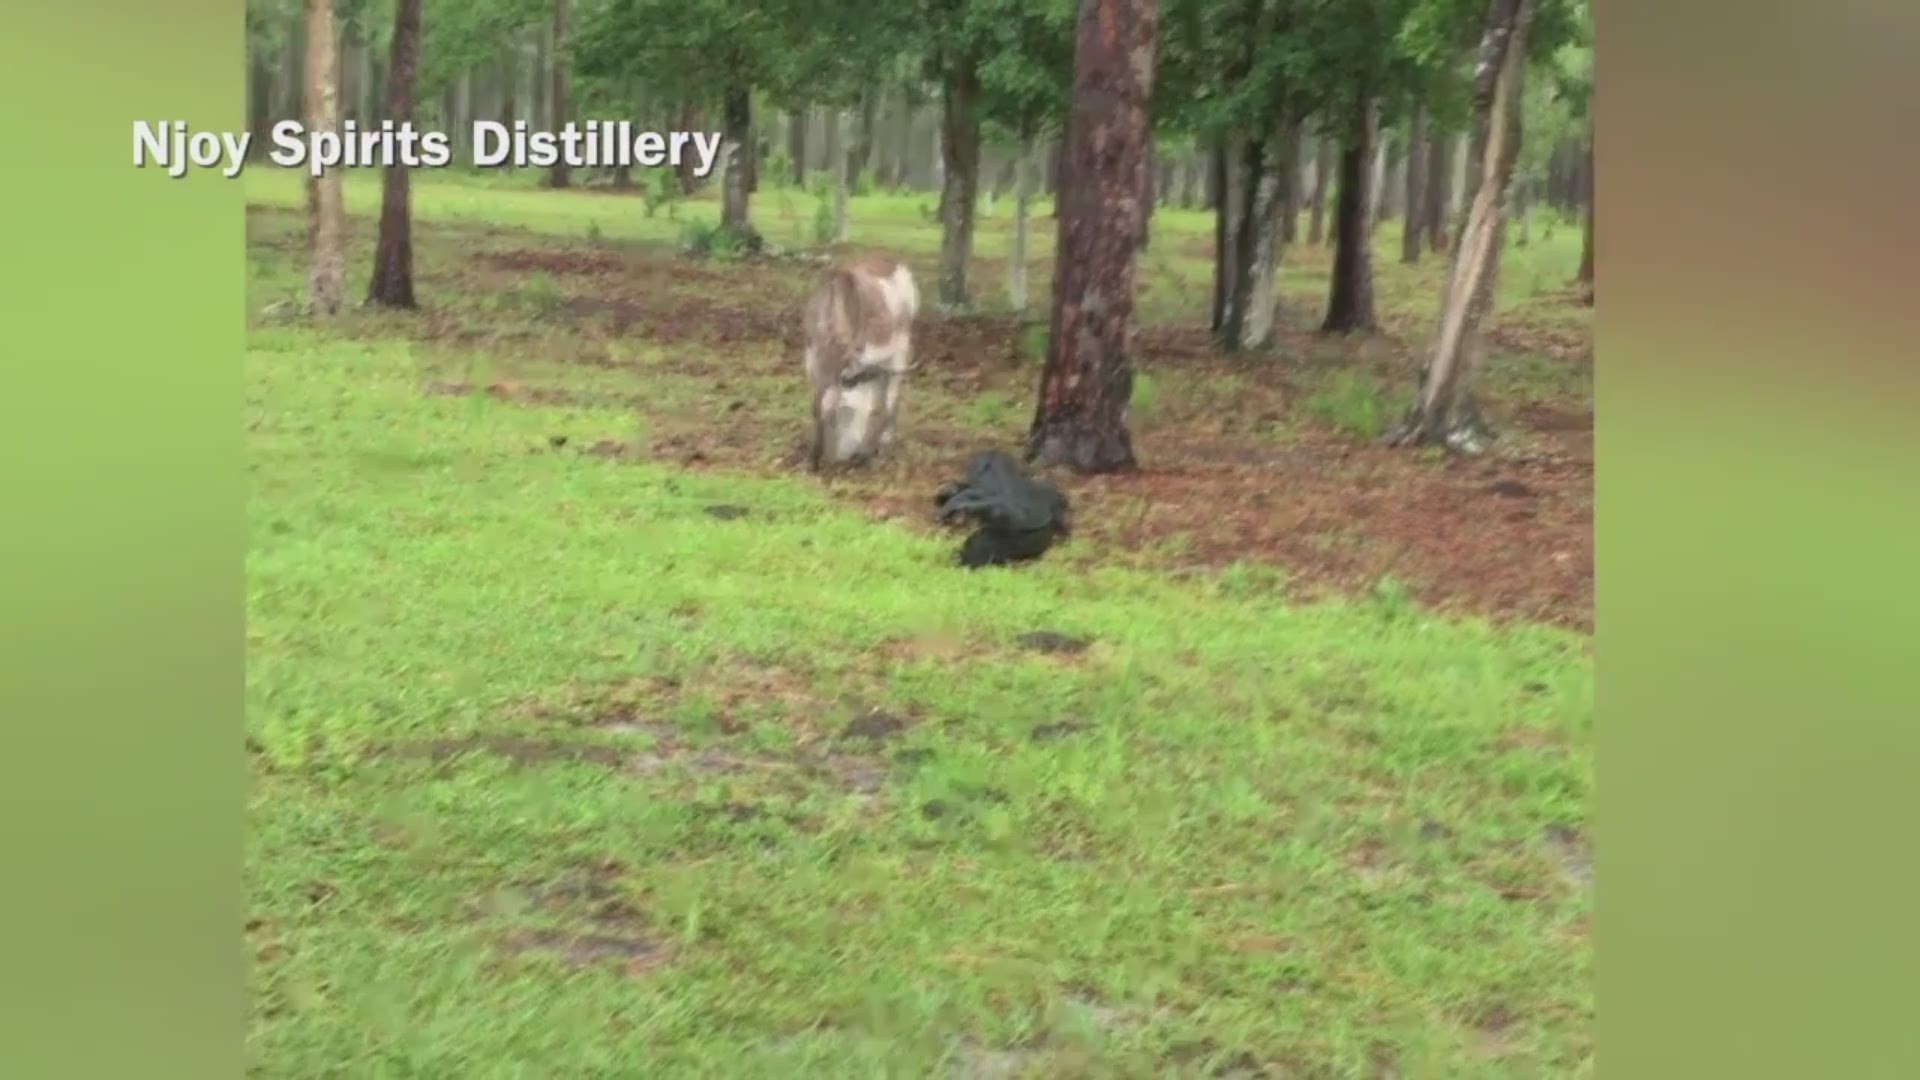 There’s almost nothing more Florida than an alligator sighting. 
Except maybe a donkey trying to take on an alligator near a local distillery. 
That’s what Njoy Spirits Distillery caught on video near Weeki Wachee.
The brave little donkey can be seen taking a strike form the gator but not getting scared off.